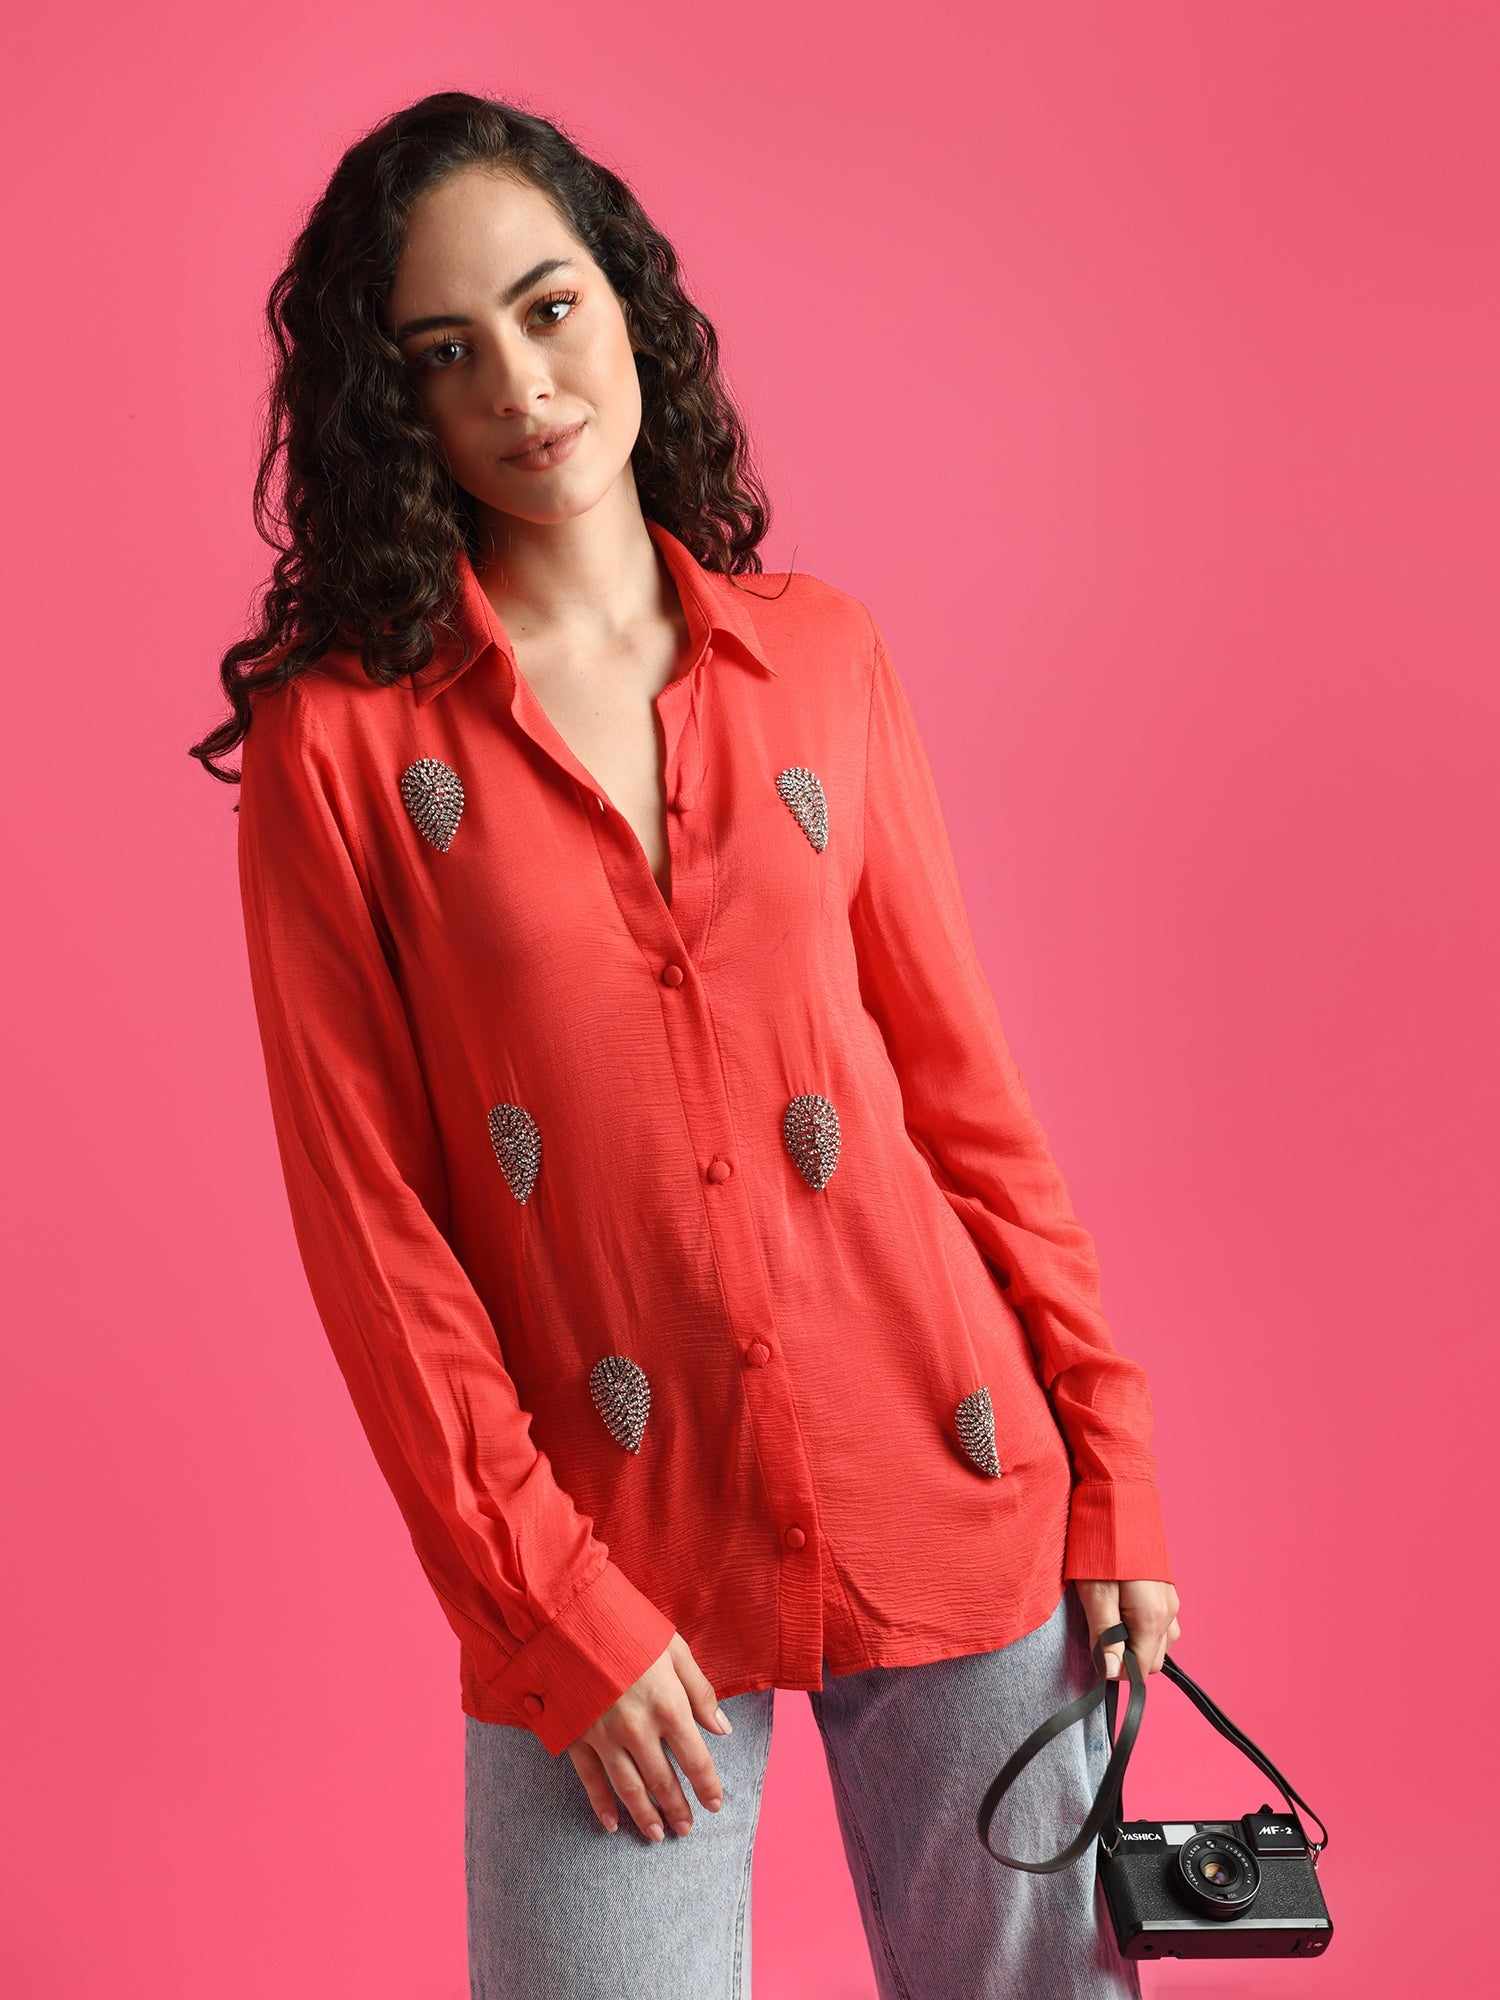 attic curves deluxe embellished red shirt